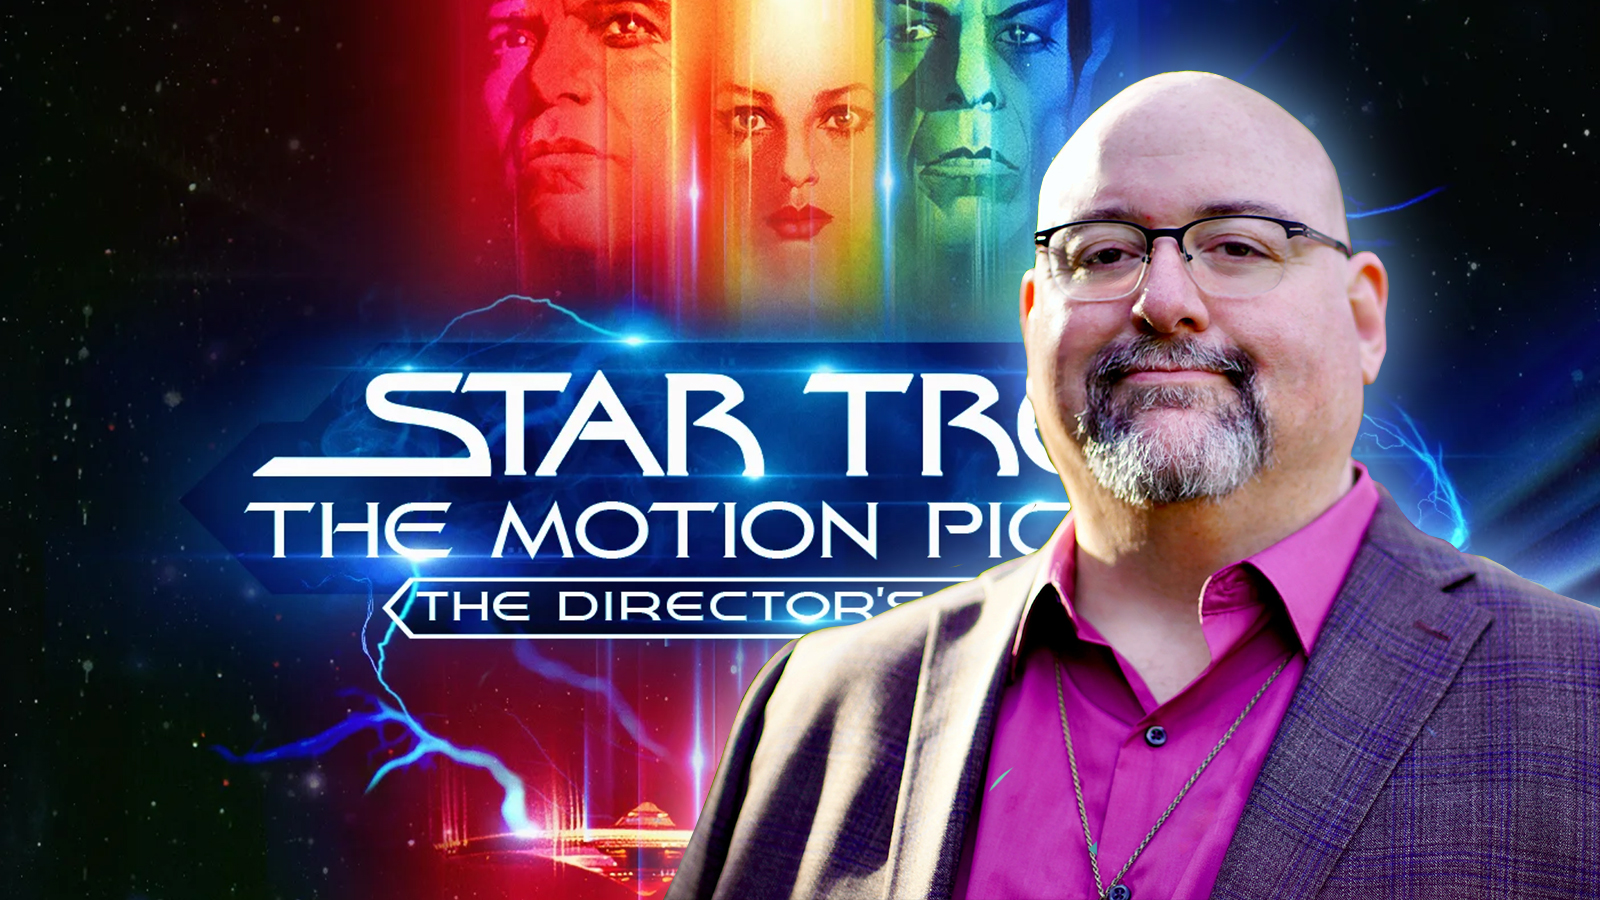 Producer David C. Fein talks the wonder of bringing ‘Star Trek: The Motion Picture’ – The Director’s Edition to 4K